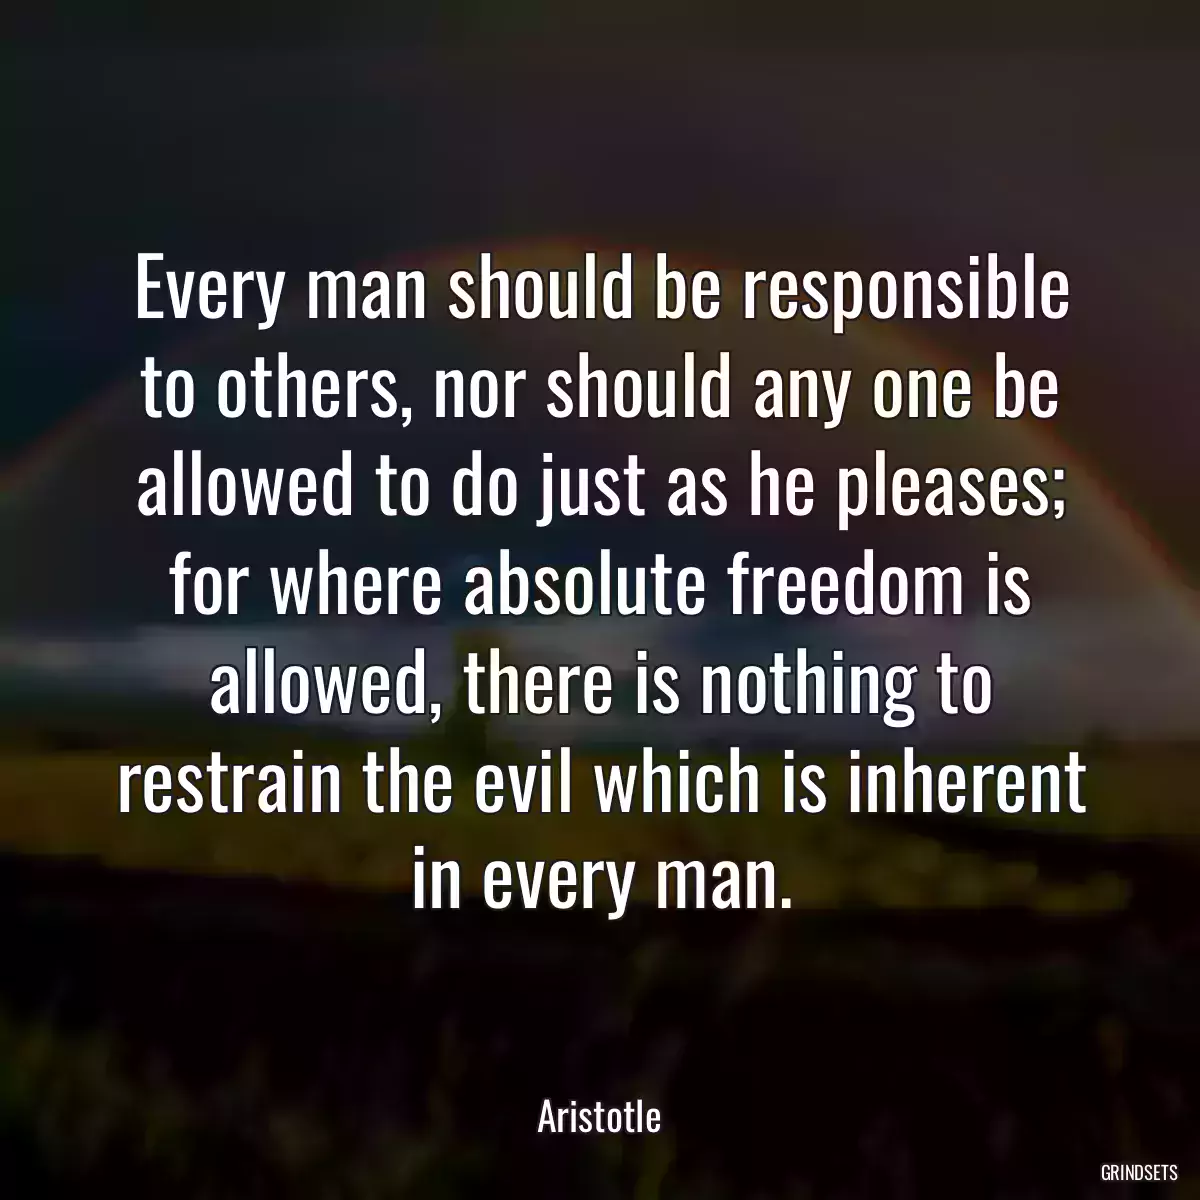 Every man should be responsible to others, nor should any one be allowed to do just as he pleases; for where absolute freedom is allowed, there is nothing to restrain the evil which is inherent in every man.